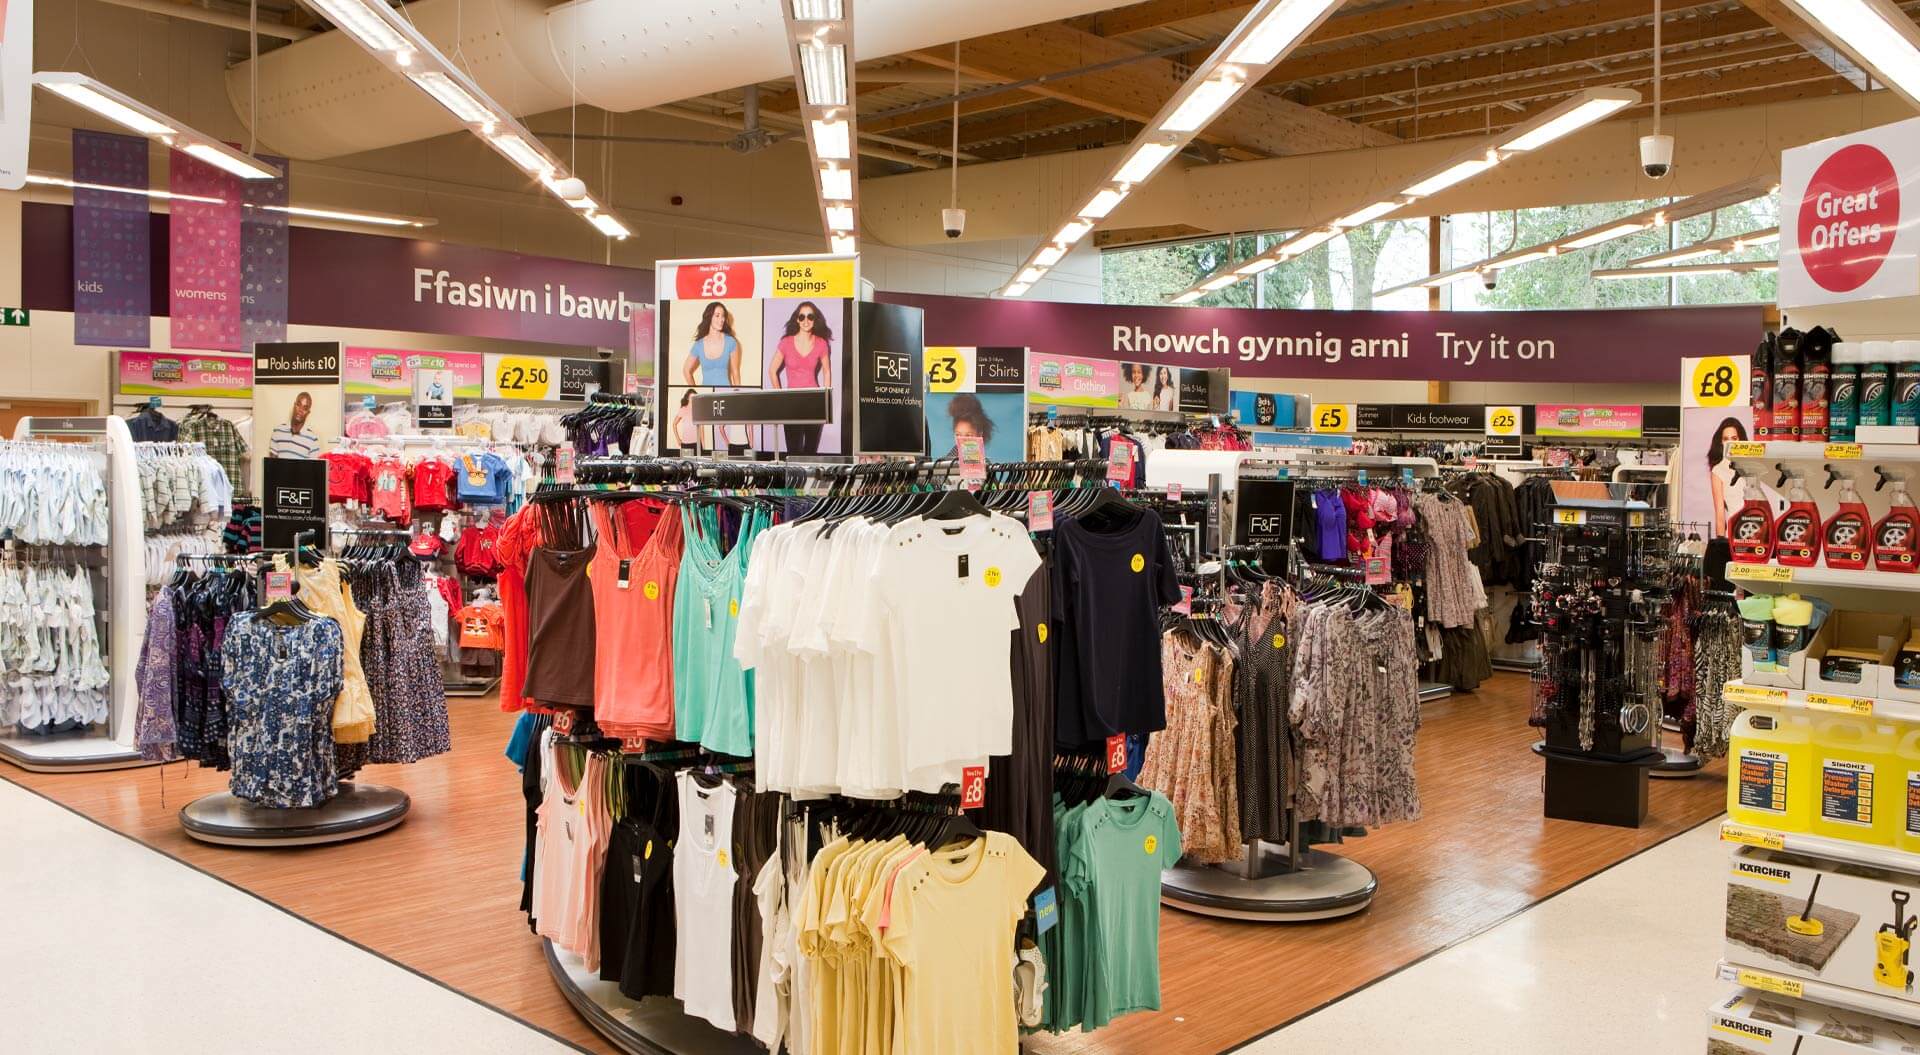 Tesco supermarket welshpool fashion department Florence and Fred, merchandising system and brand communications 